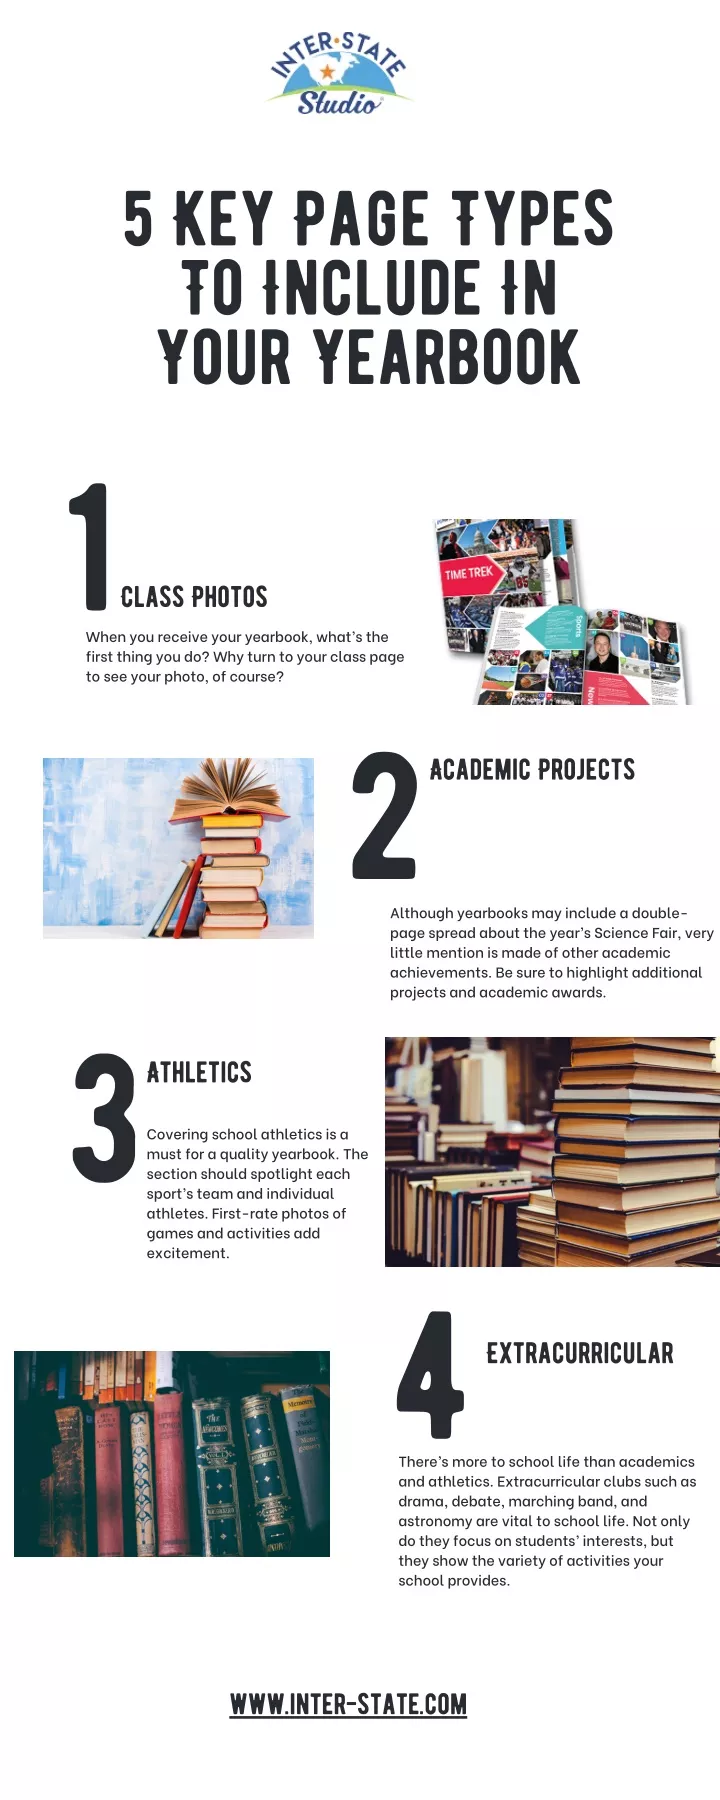 5 key page types to include in your yearbook